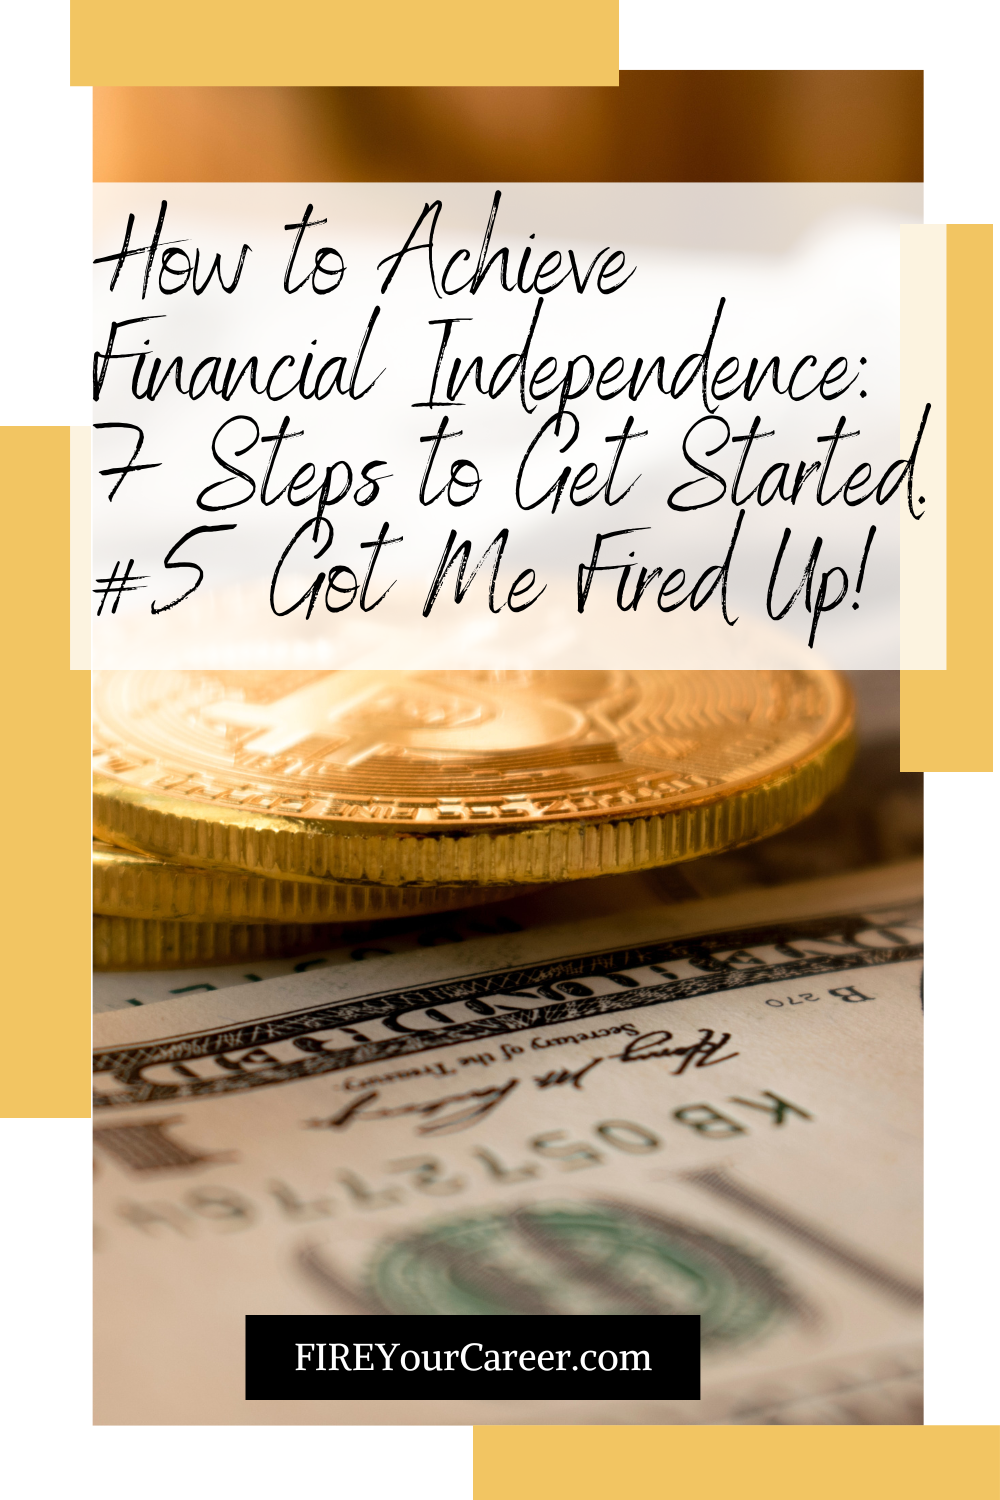 How to Achieve Financial Independence 7 Steps to Get Started. #5 Got Me Fired Up!